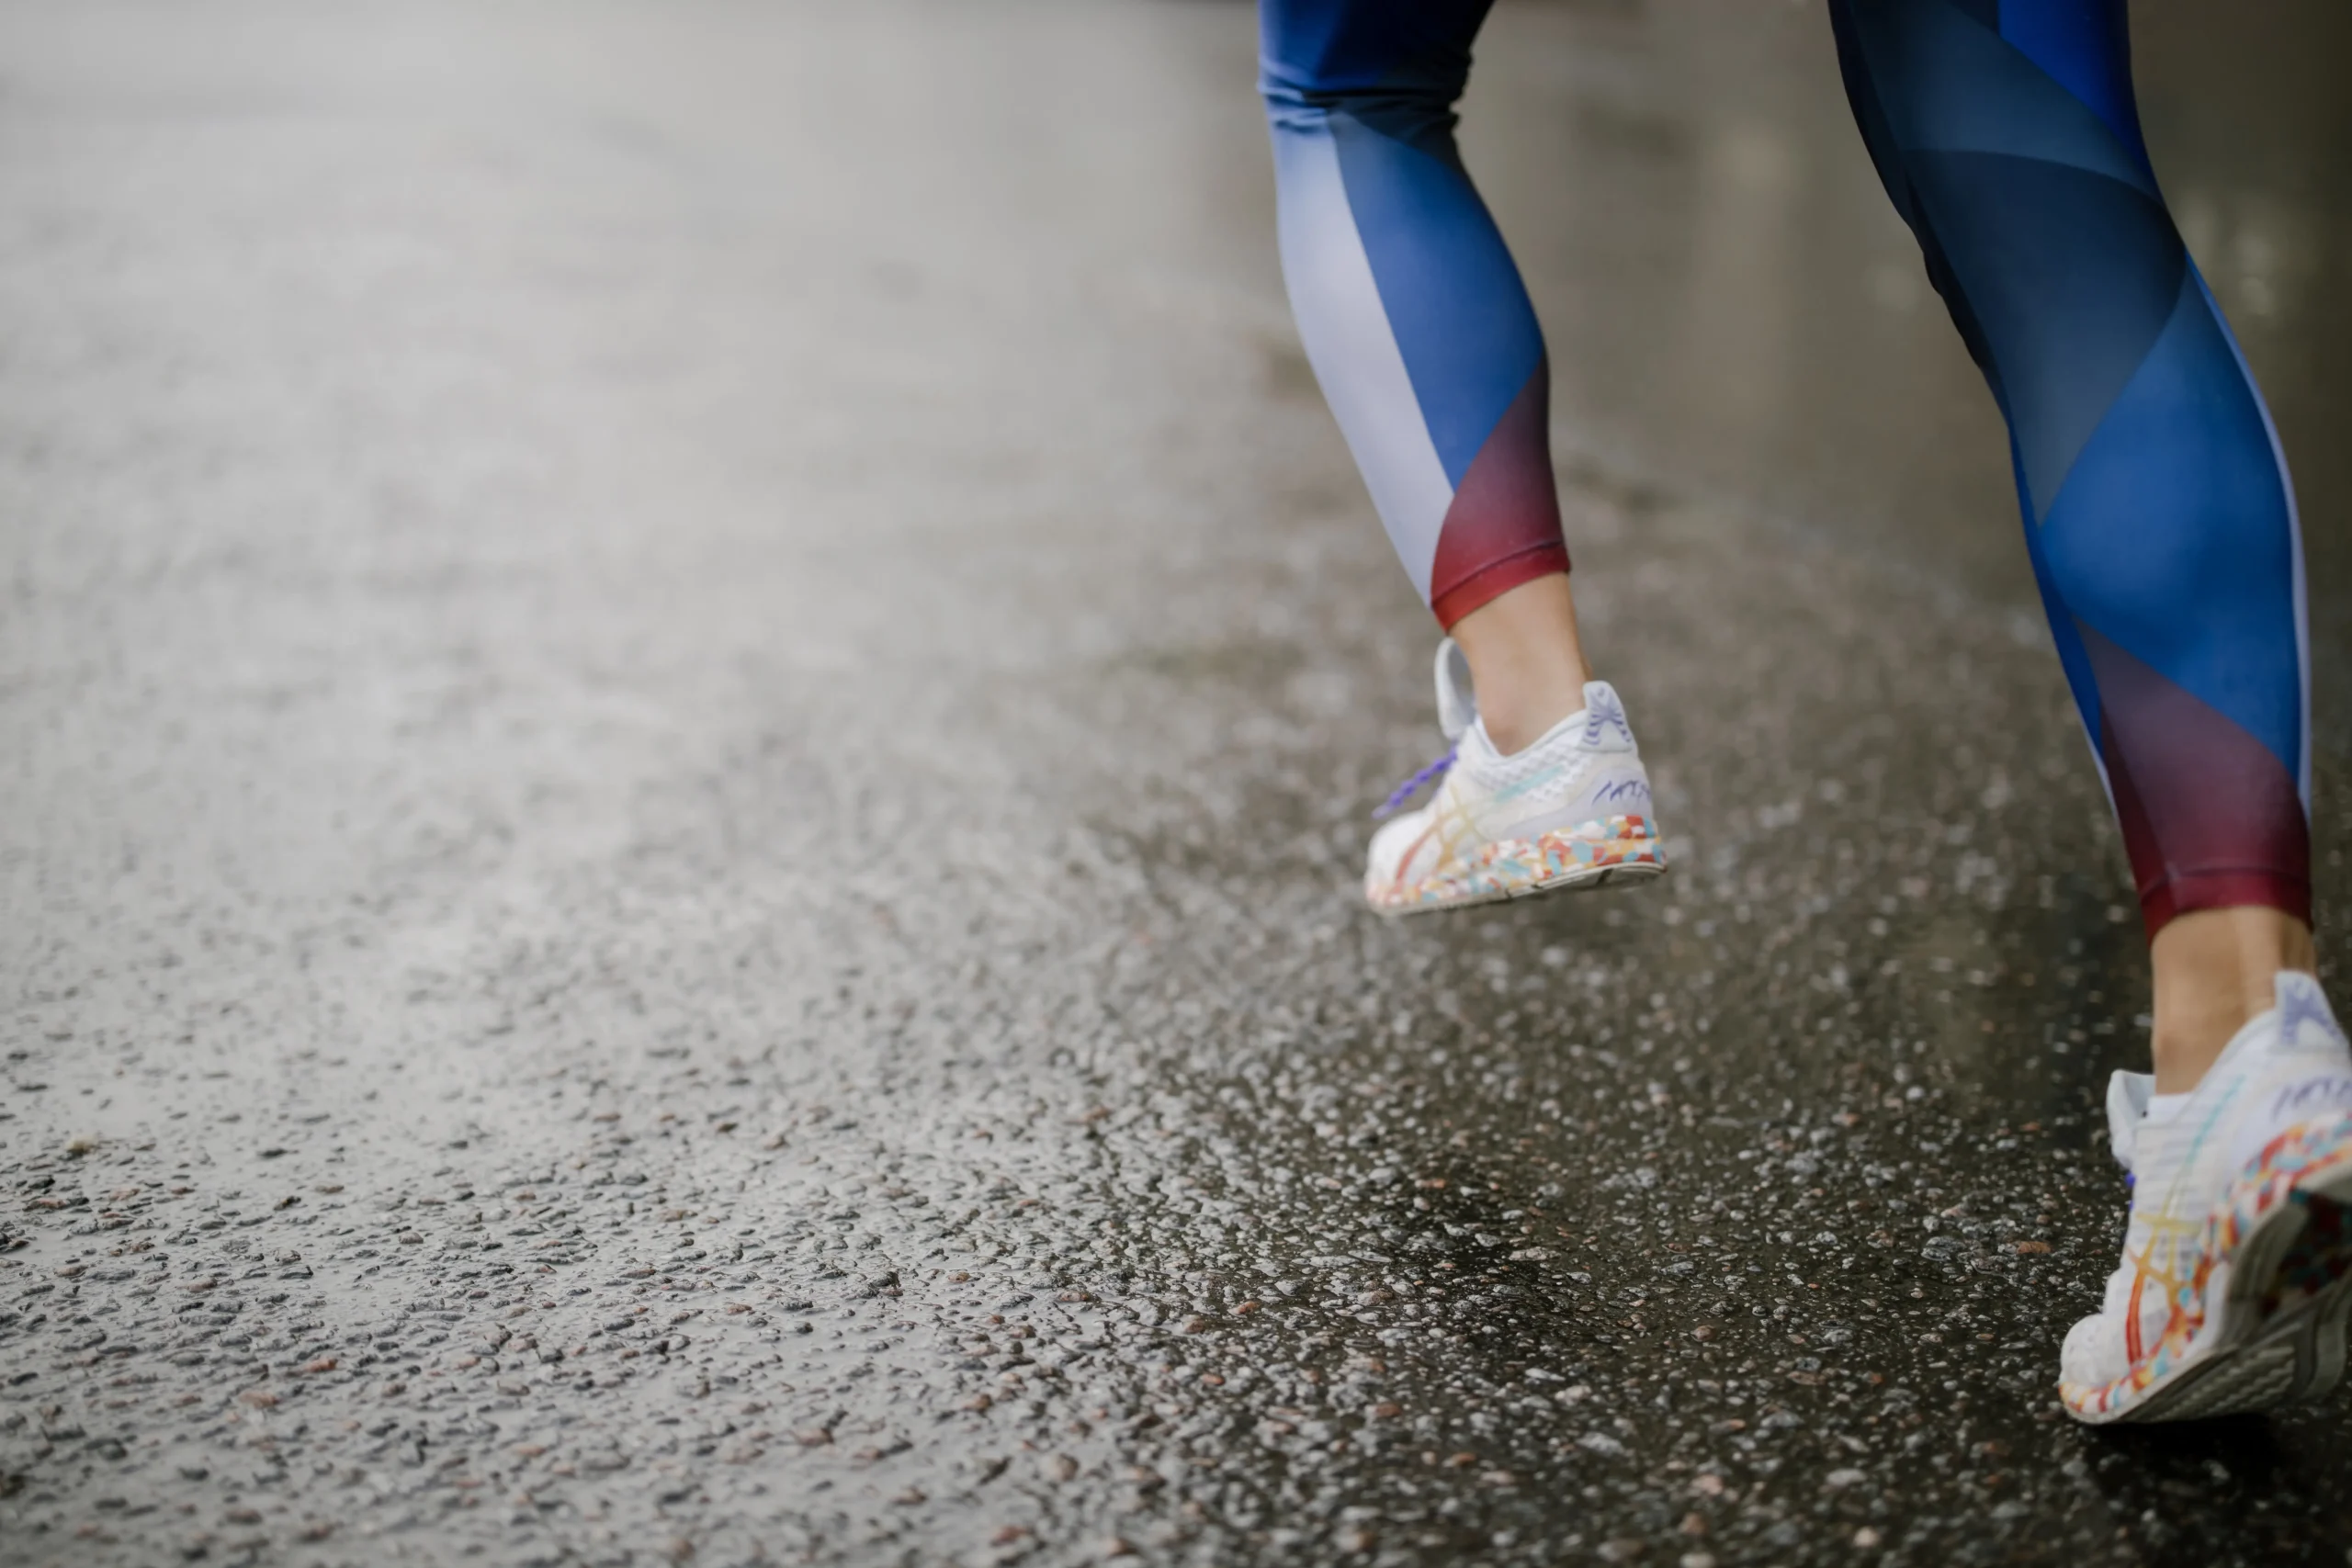 How To Waterproof Running Shoes